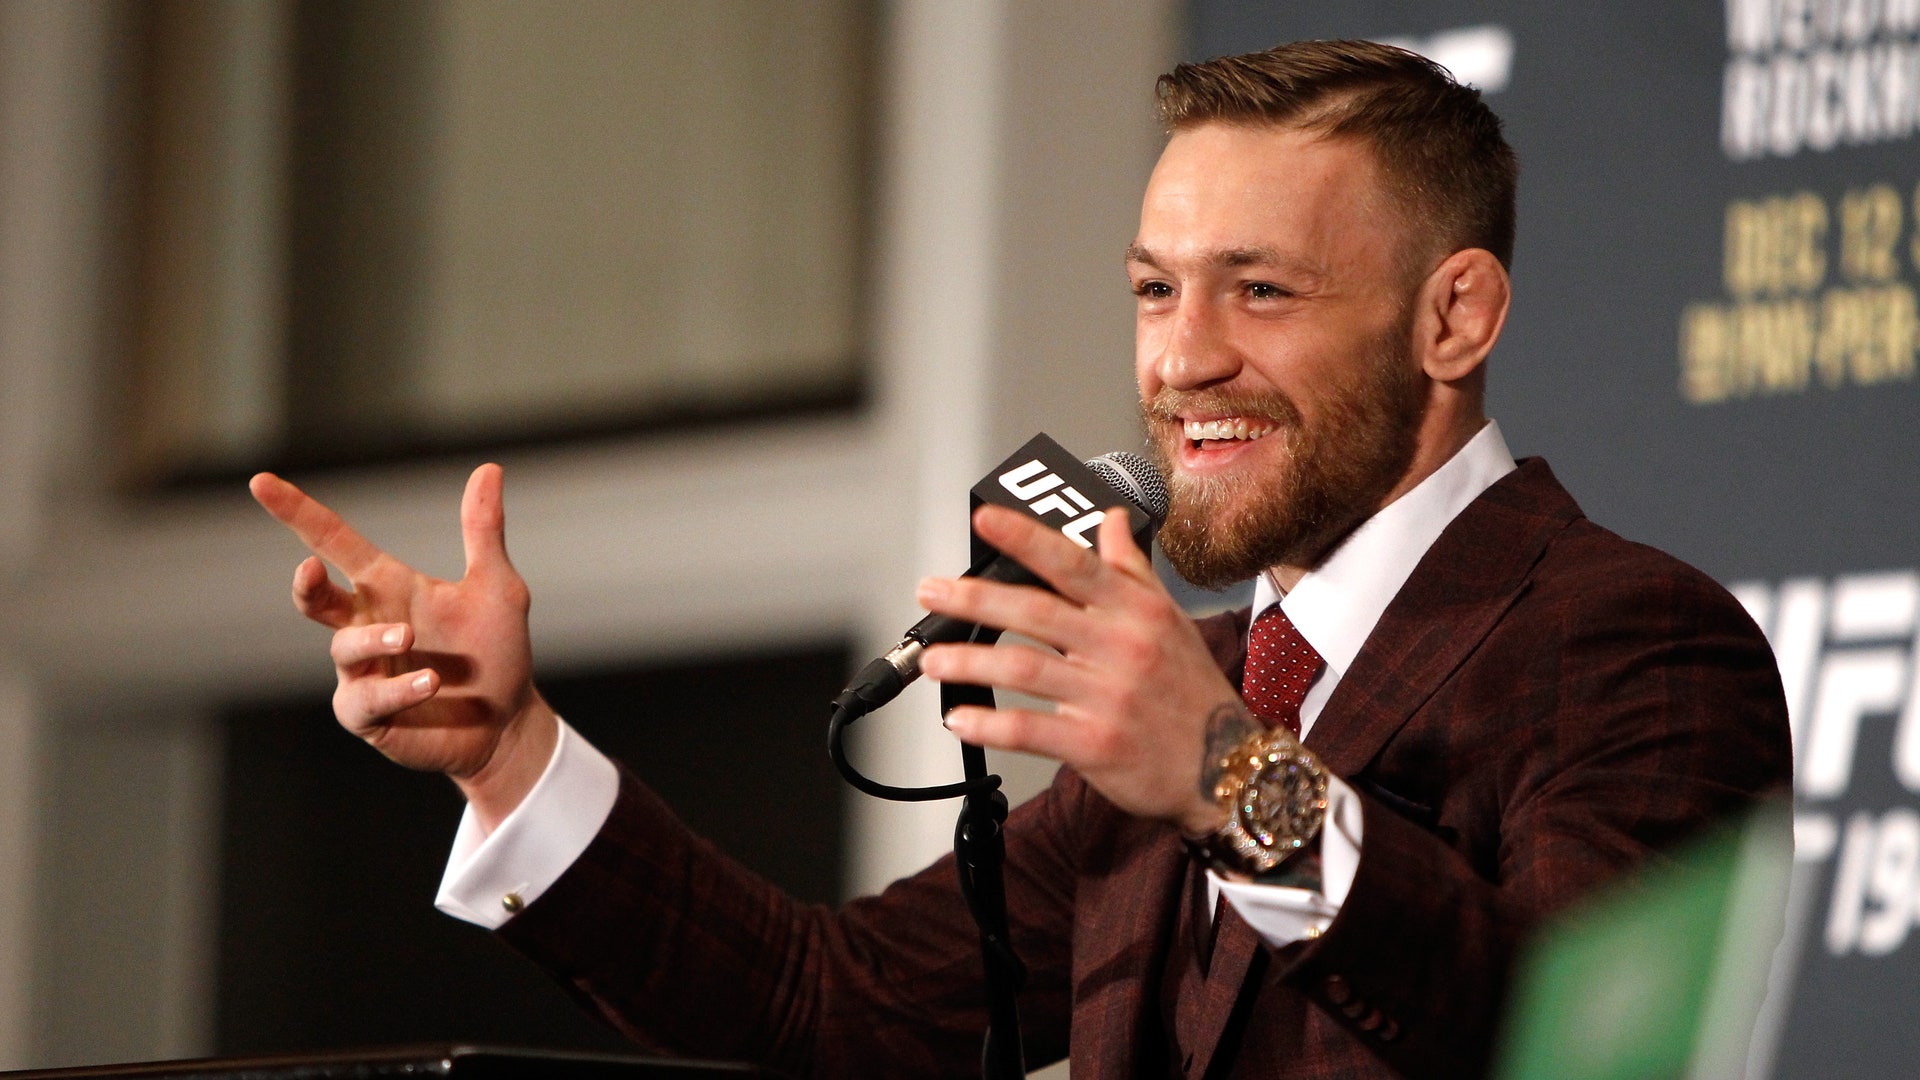 Conor McGregor has unveiled a million-dollar watch that will amaze his mind

